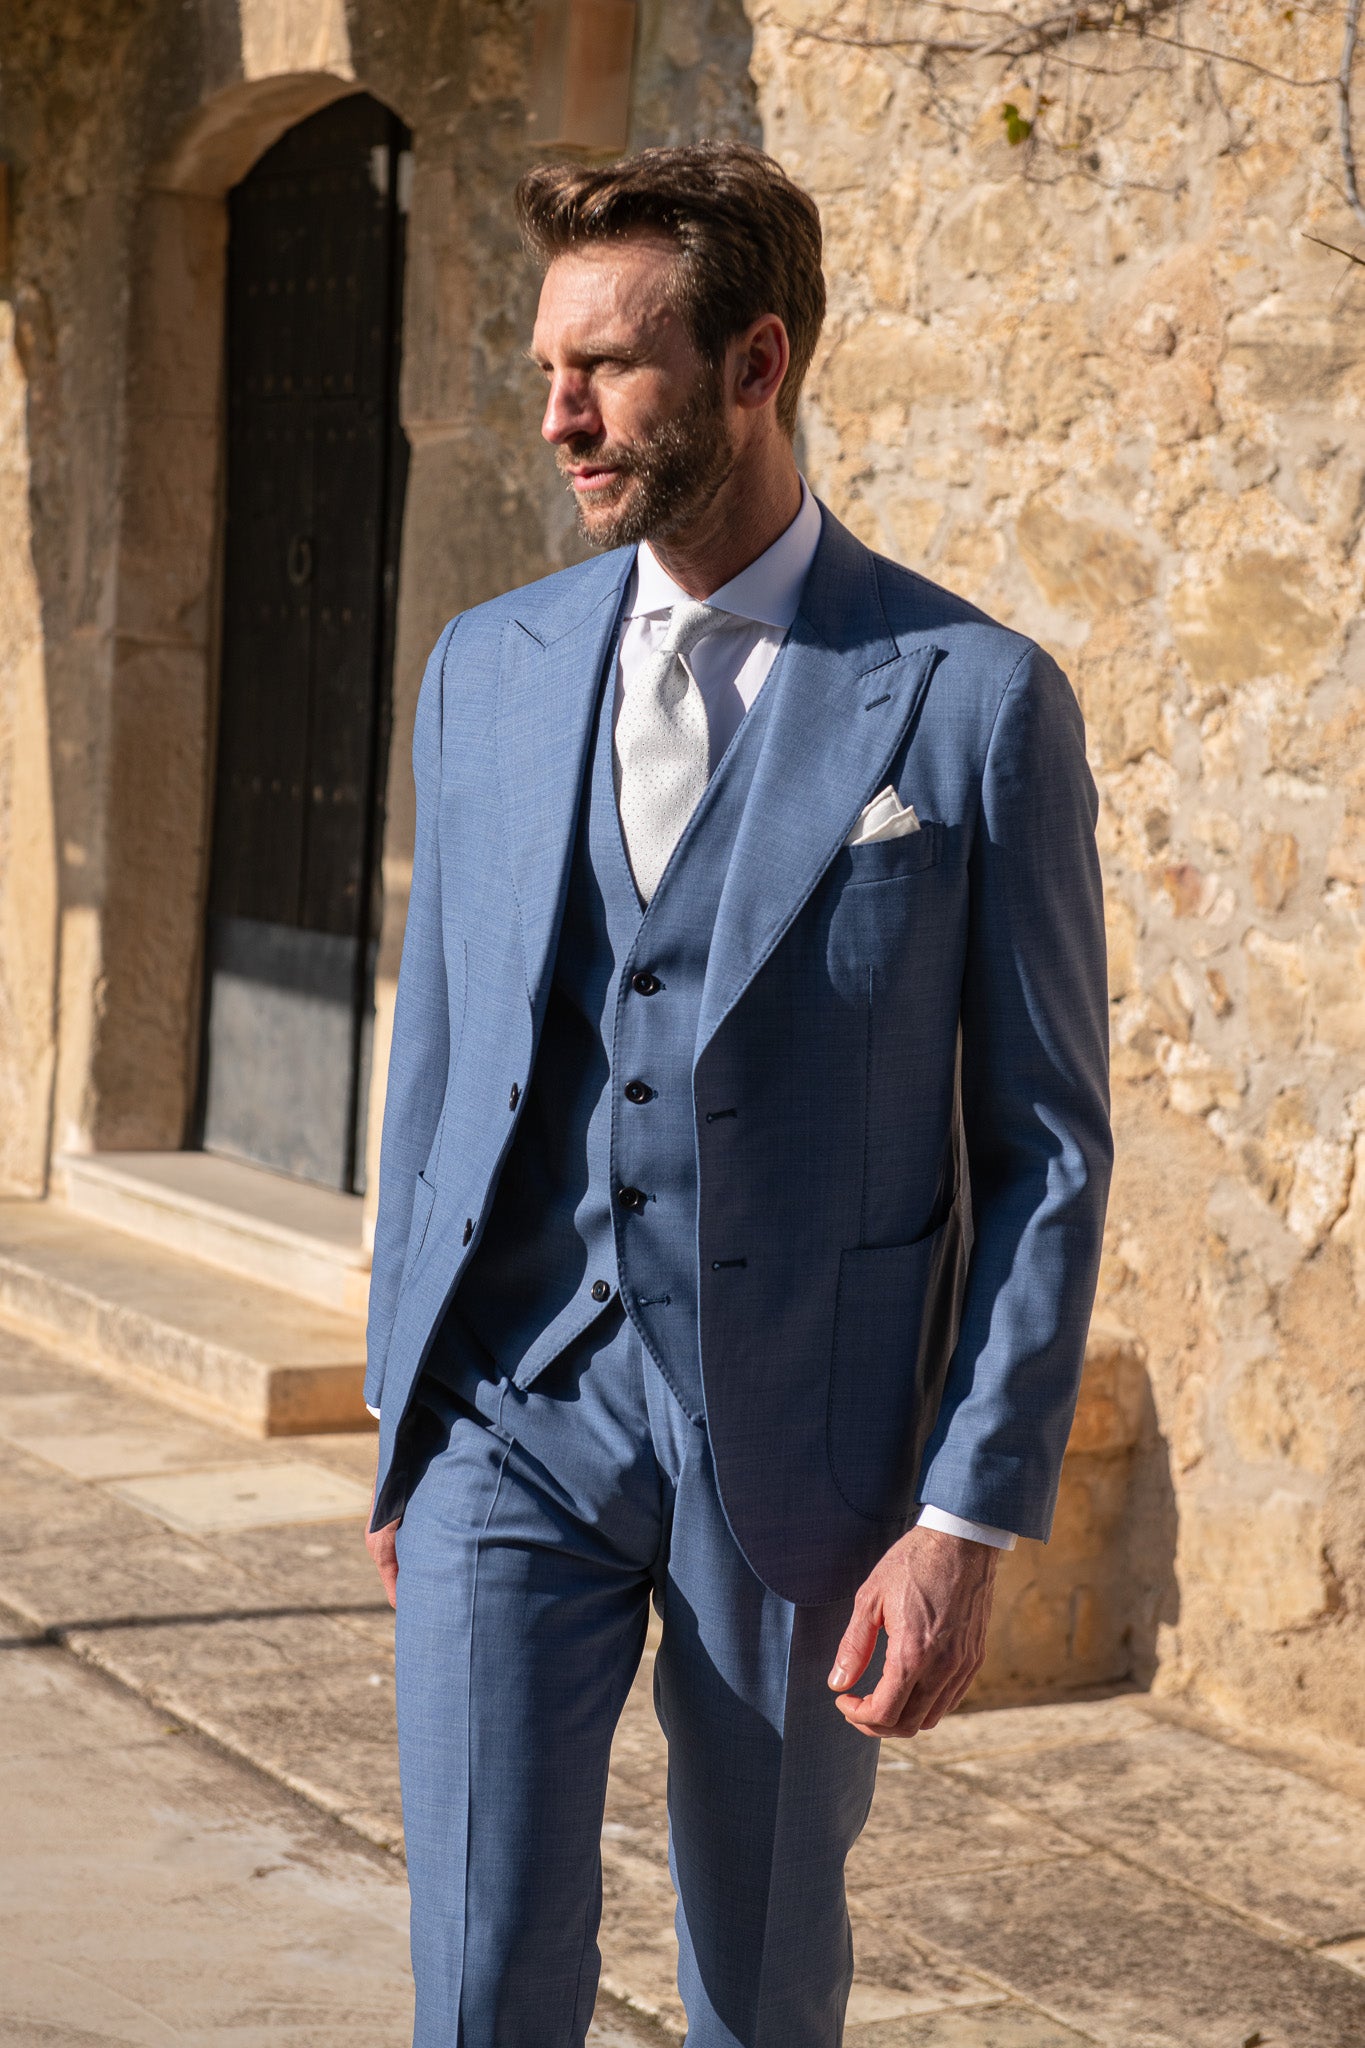 Diverse nåde Foran dig Light blue suit "Made to Order" - Made in Italy - Pini Parma